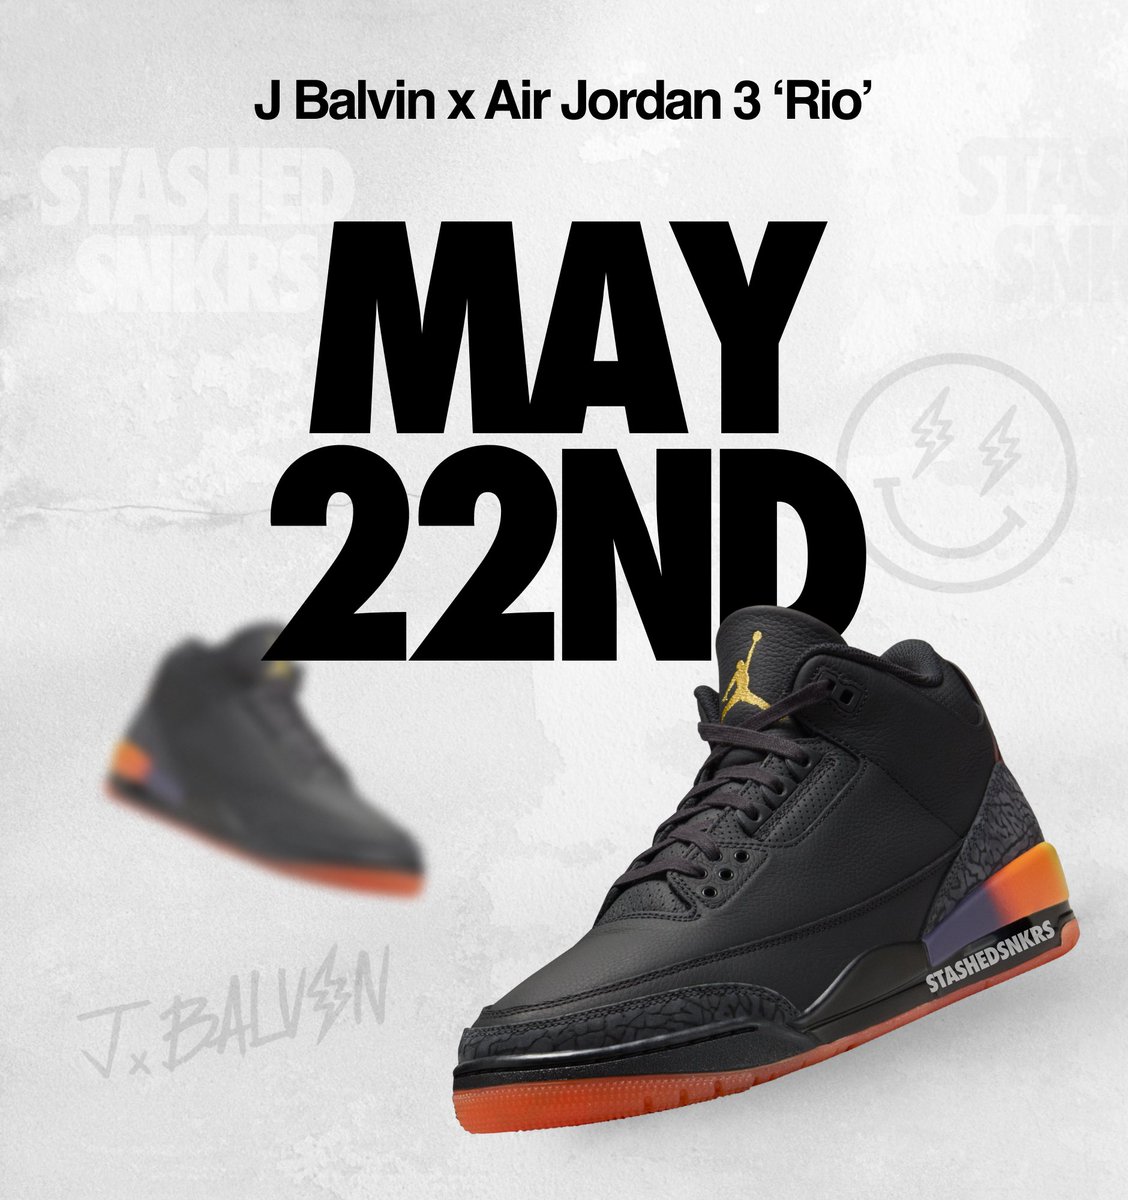 One of the year's most limited Jordan releases ‼️ The J Balvin x Air Jordan 3 ‘Rio’ drops on May 22nd via the SNKRS App, select retailers, and J Balvin’s website for €230.🌅